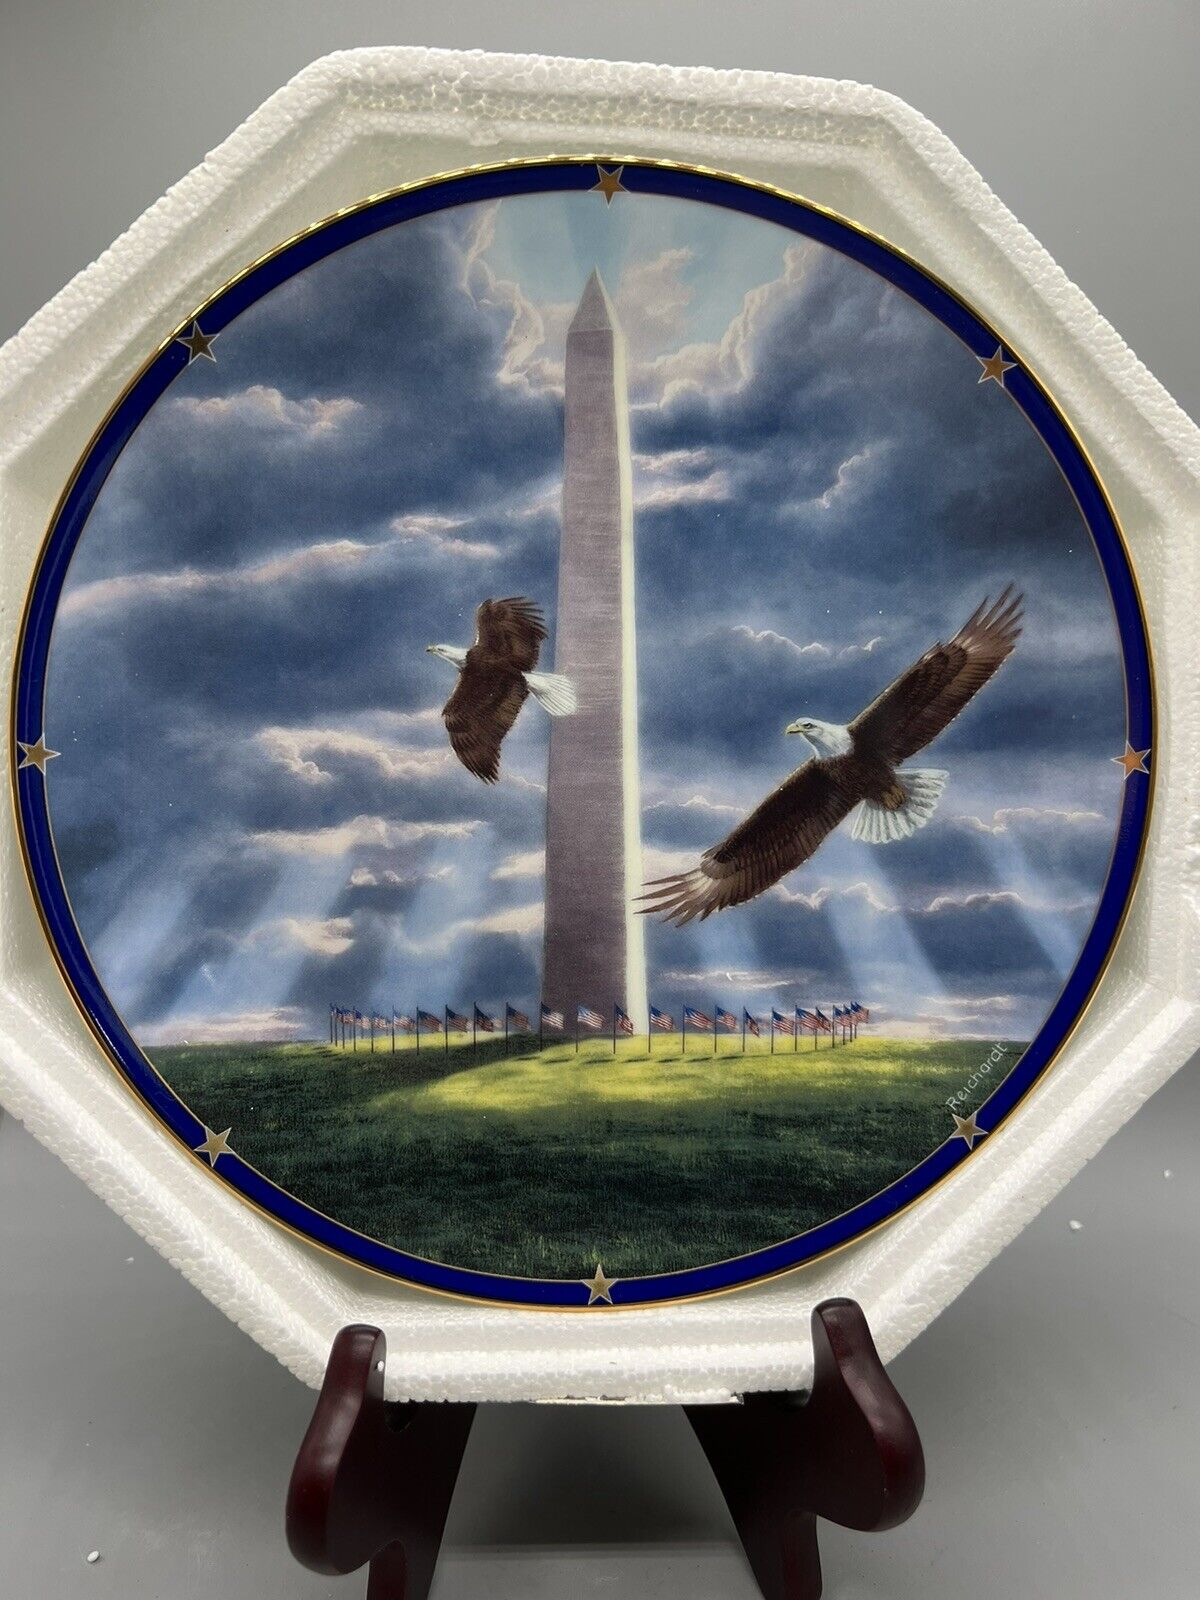 The Washington Monument By Rudi Reichardt Limited Porcelain Collector Plate